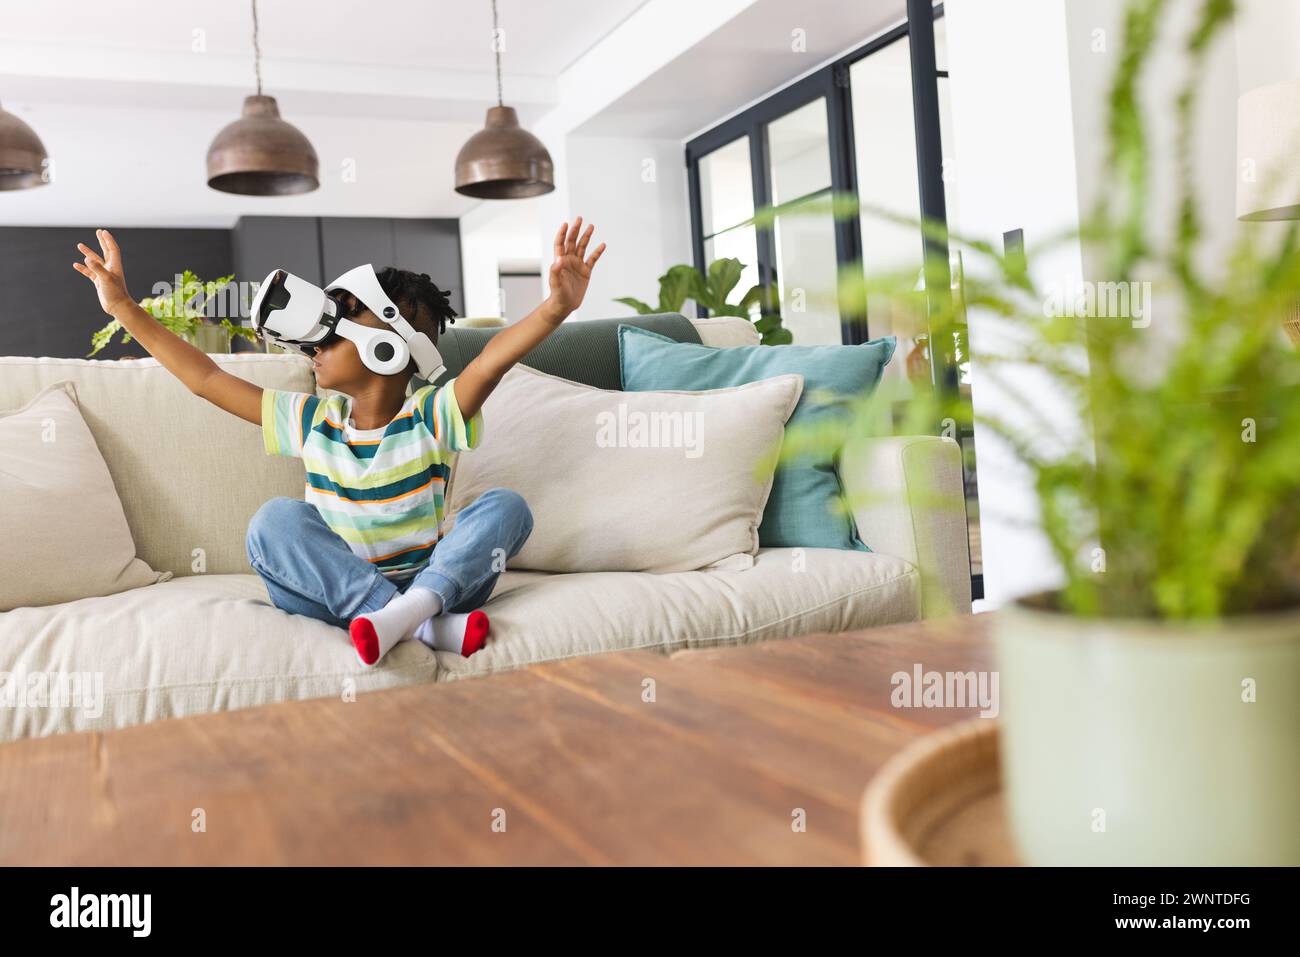 African American boy enjoys a virtual reality headset, arms raised in excitement Stock Photo